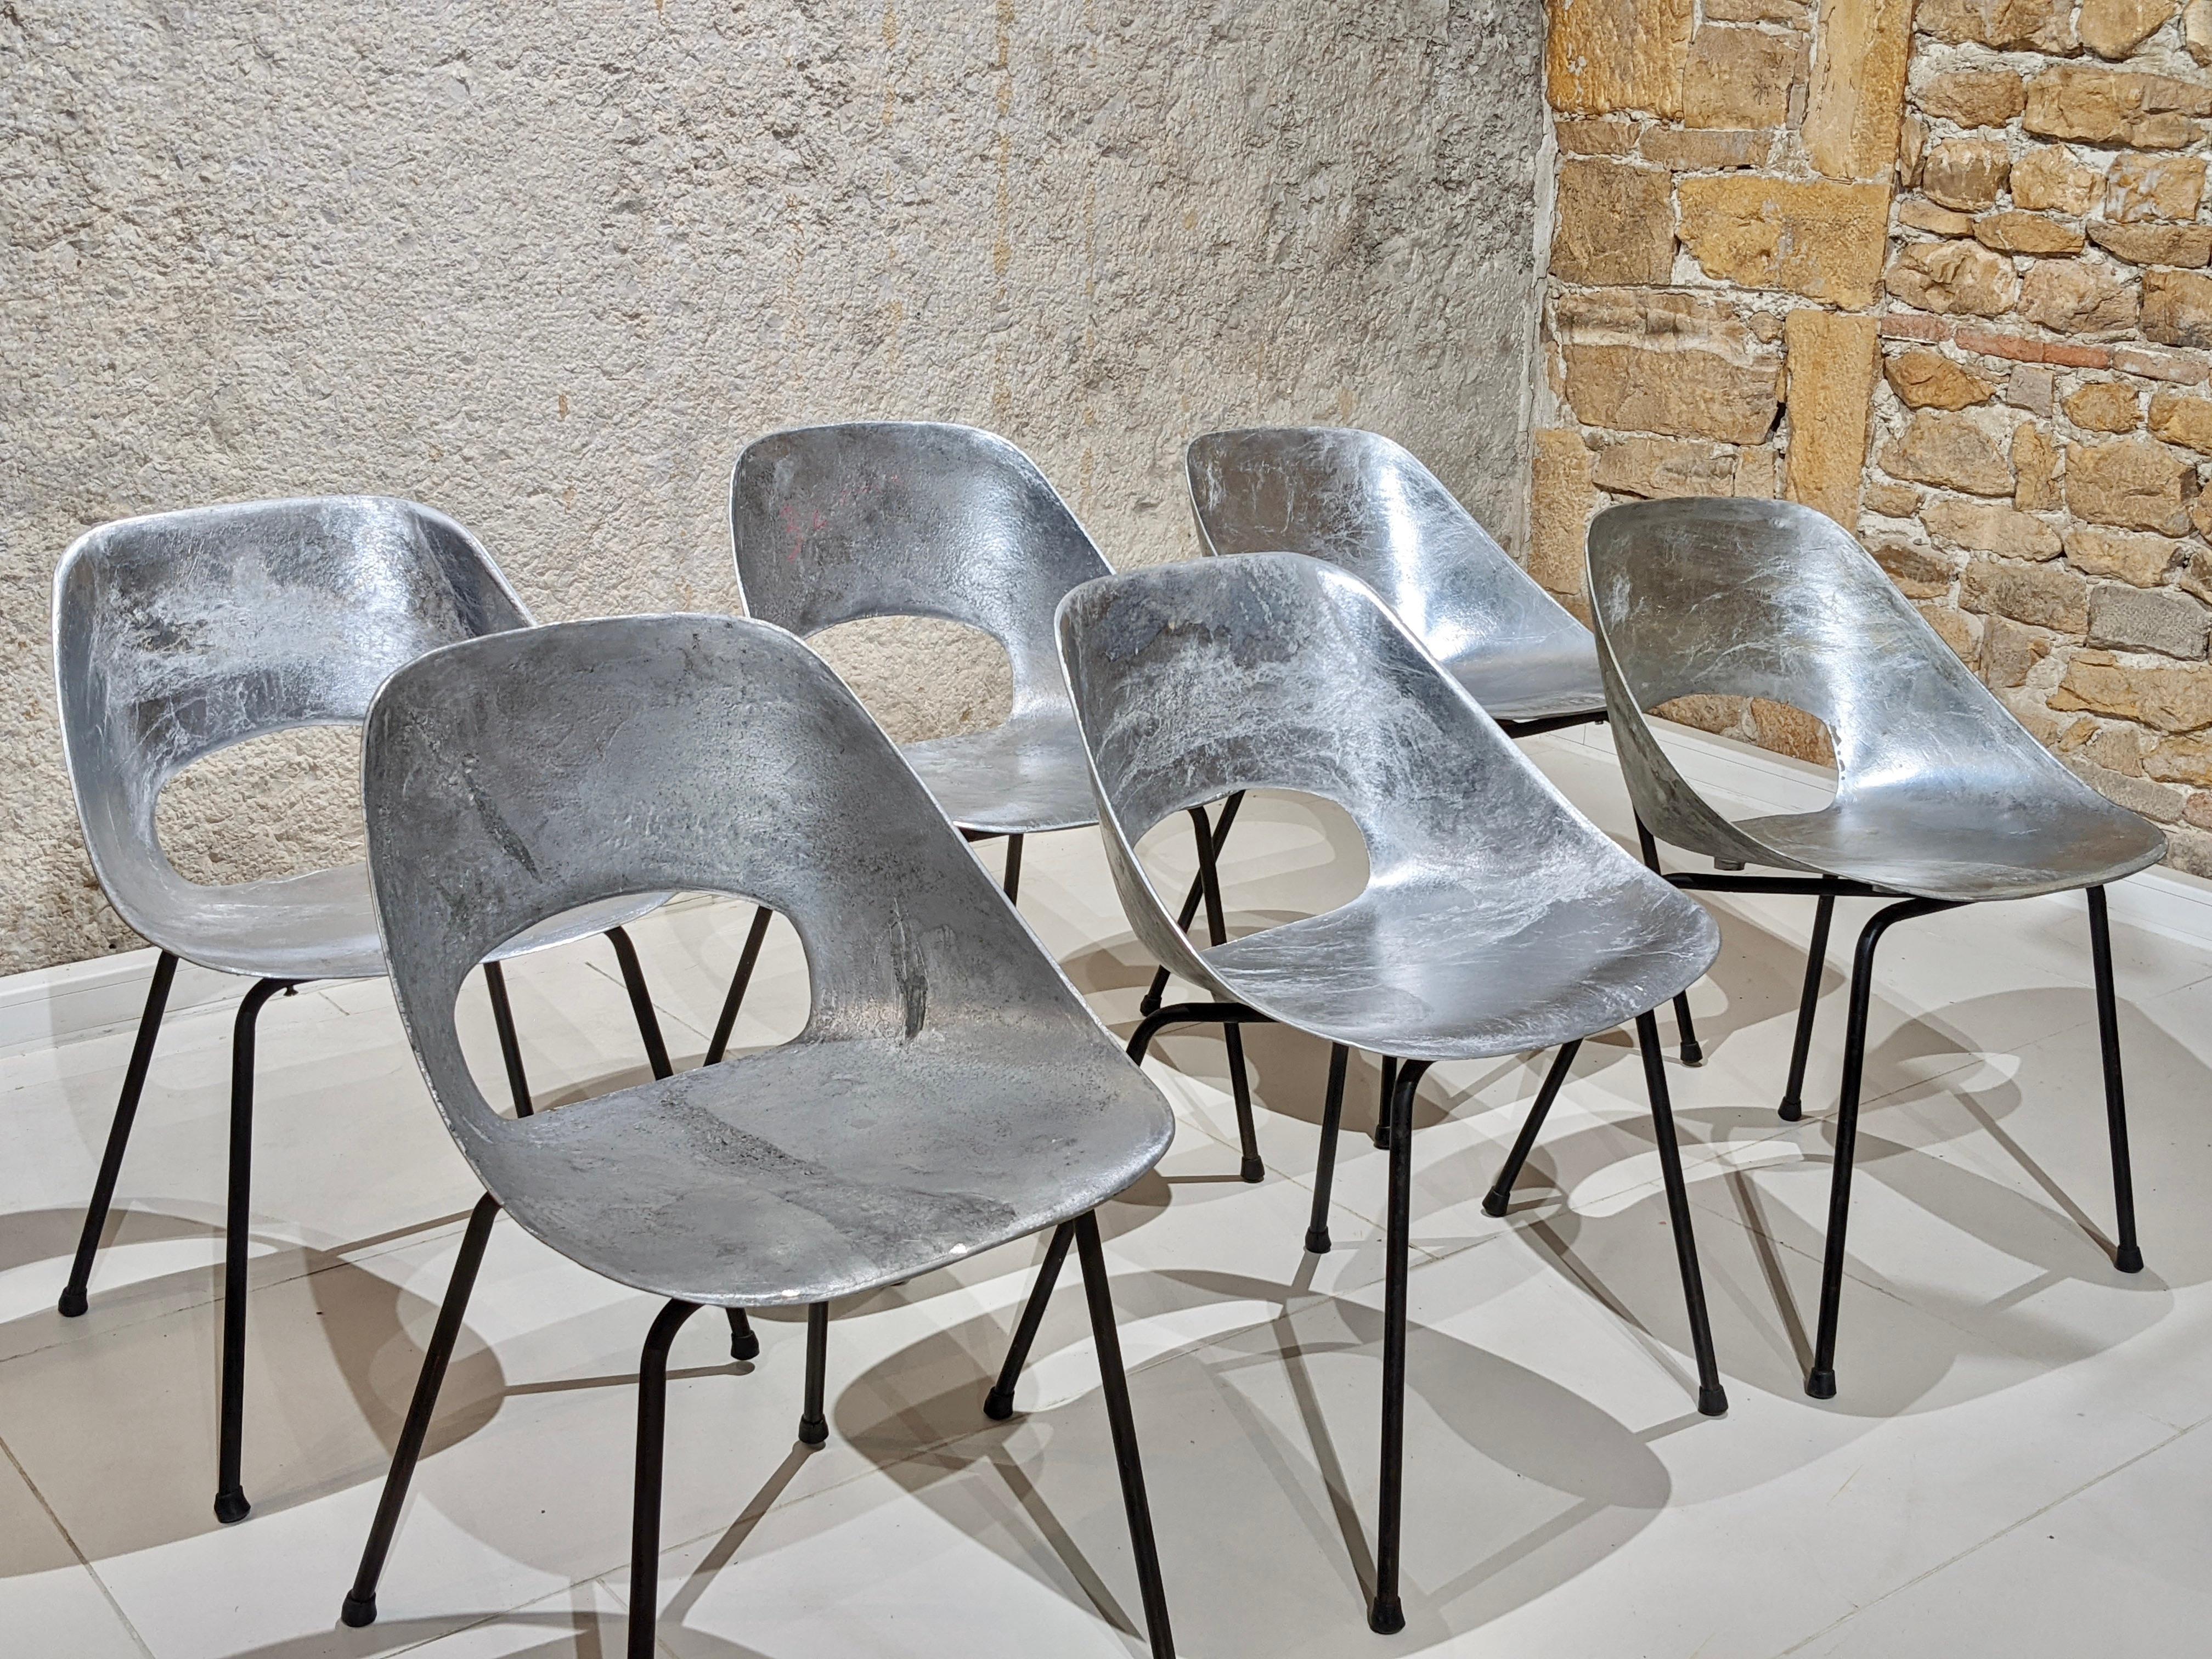 Set of 6 Aluminum tulip chair, Pierre Guariche 
Circa 1950. 
Cast aluminium shell and black tubular metal legs.
Good condition. Condition according to age and use. (see photo). 

Dimensions : H 74cm x W 46cm x D 50cm (approximate).